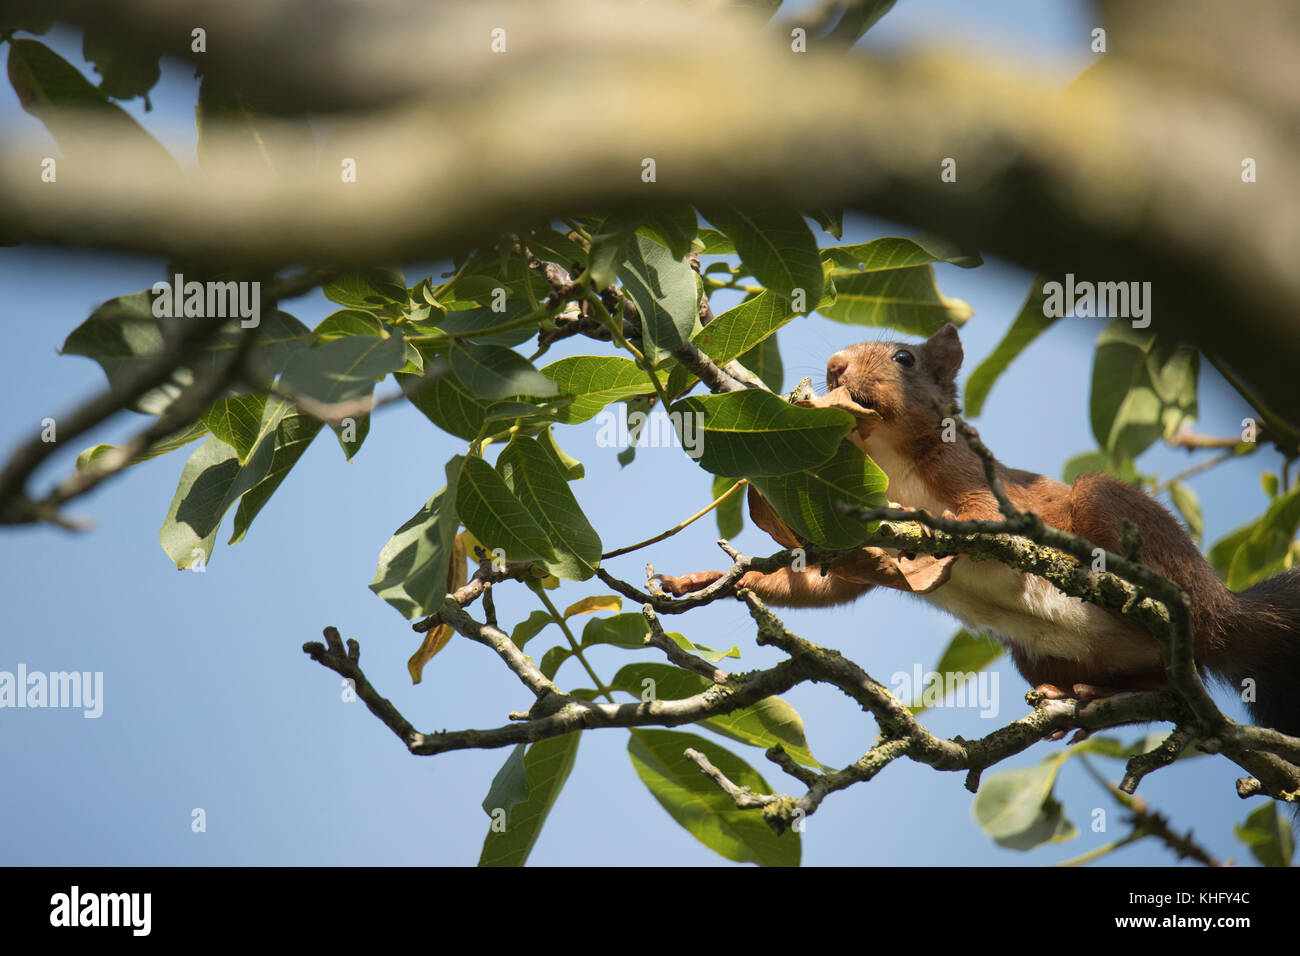 Squirrel running high in a tree, picture taken from under it Stock Photo